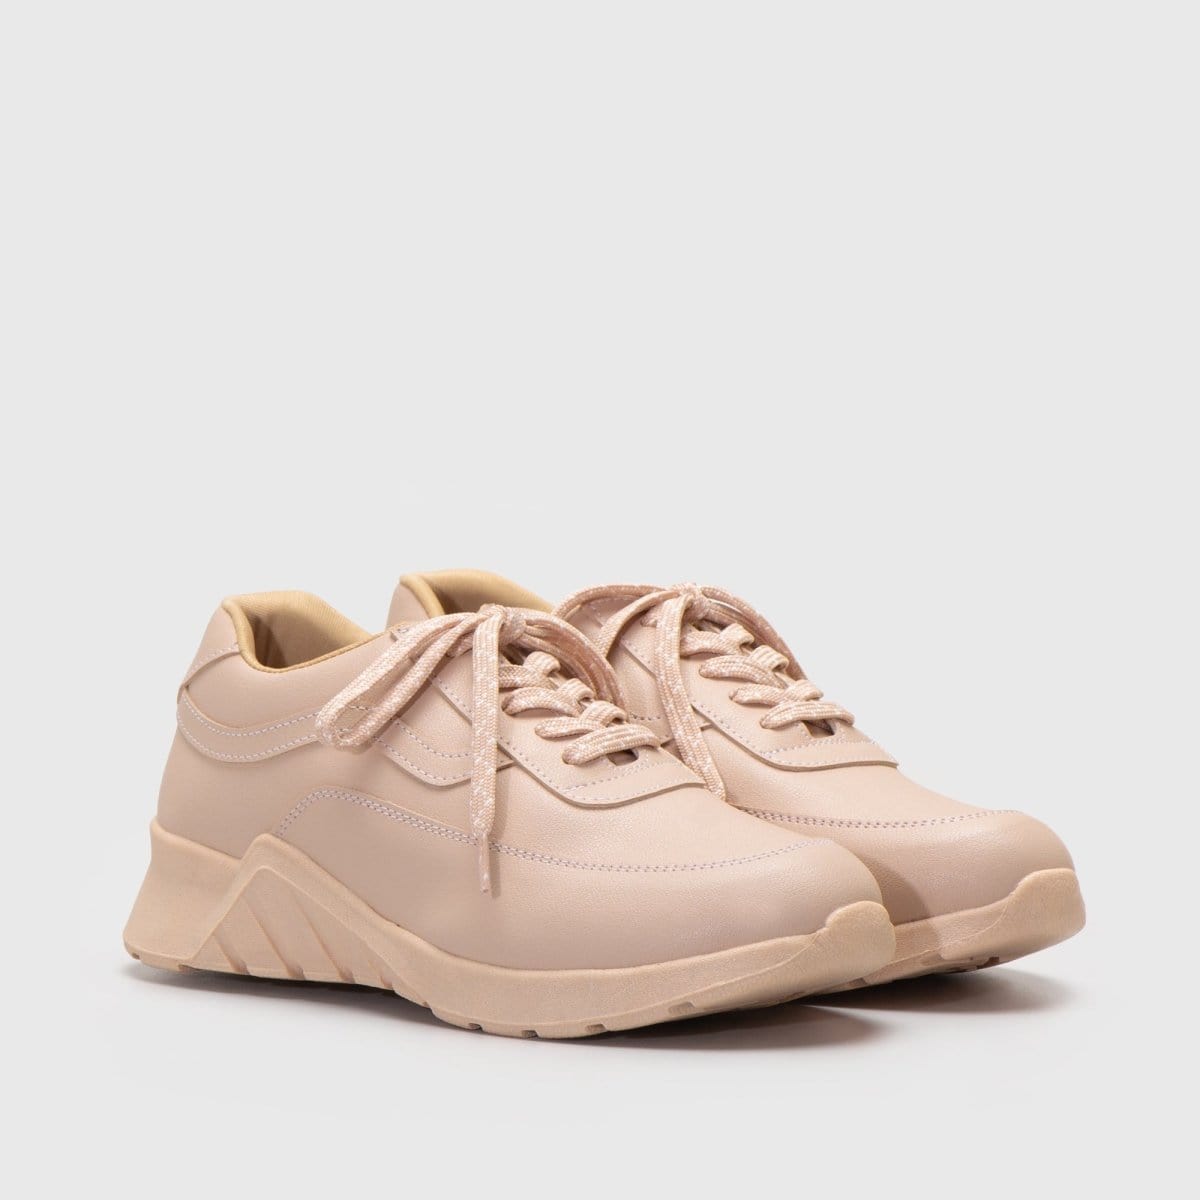 Adorable Projects Official Sneakers 42 / Peach Kikimora Sneakers Peach